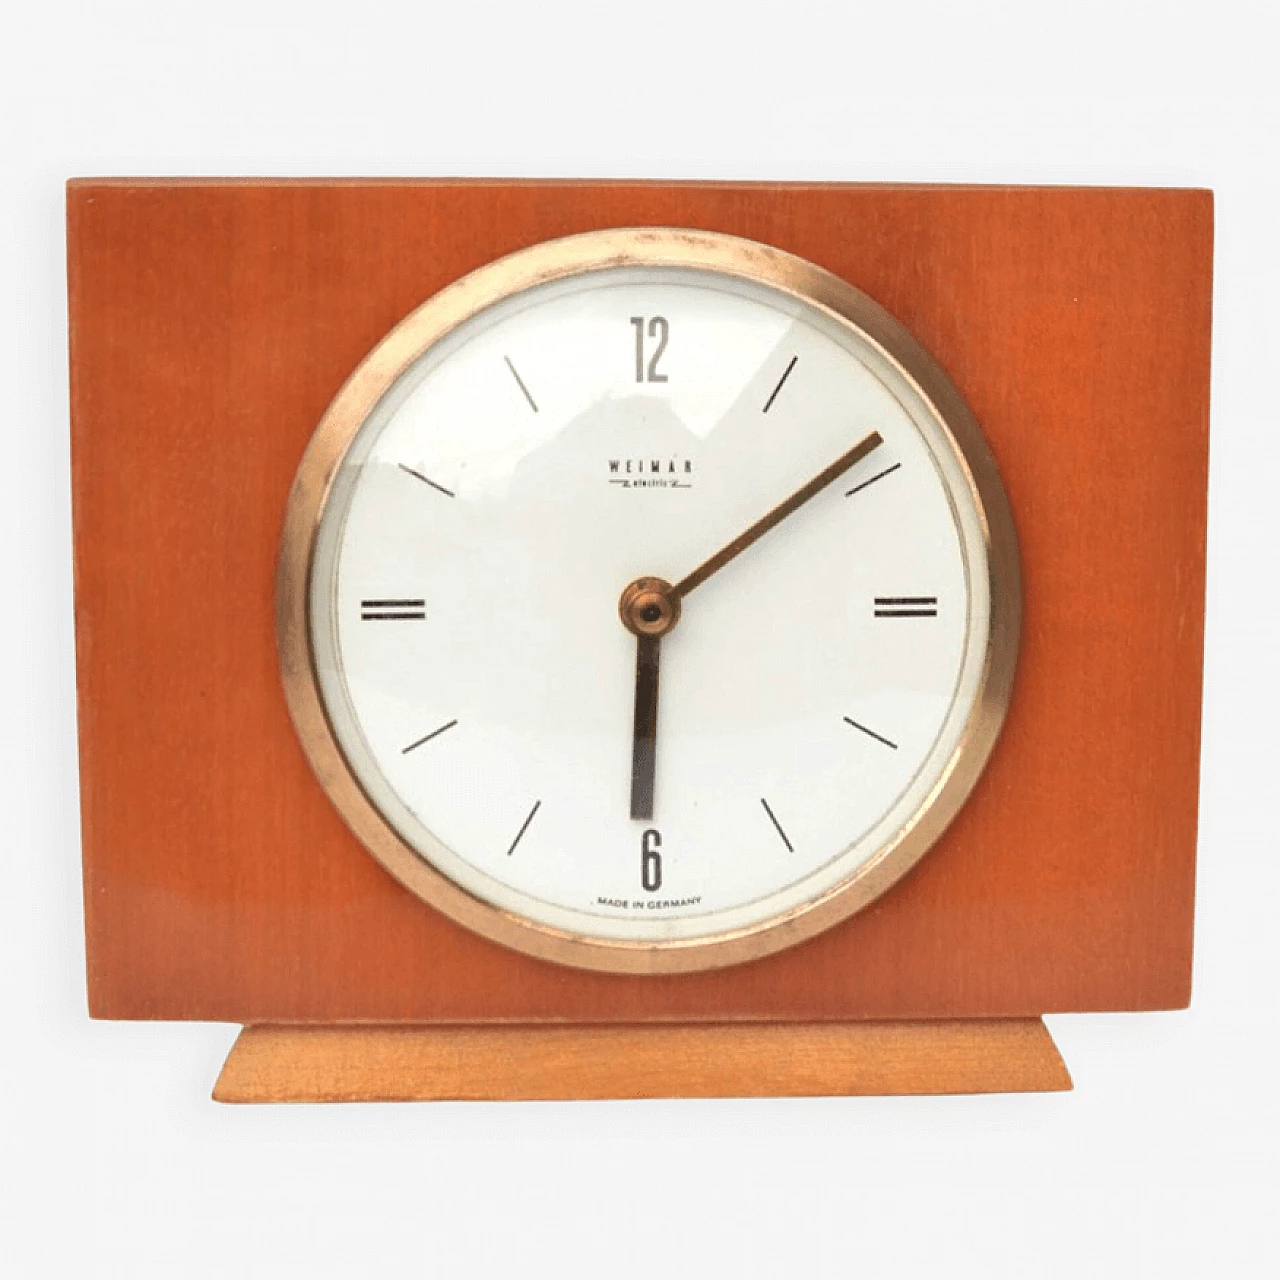 Wooden mantel clock by Weimar Electric, 1970s 9